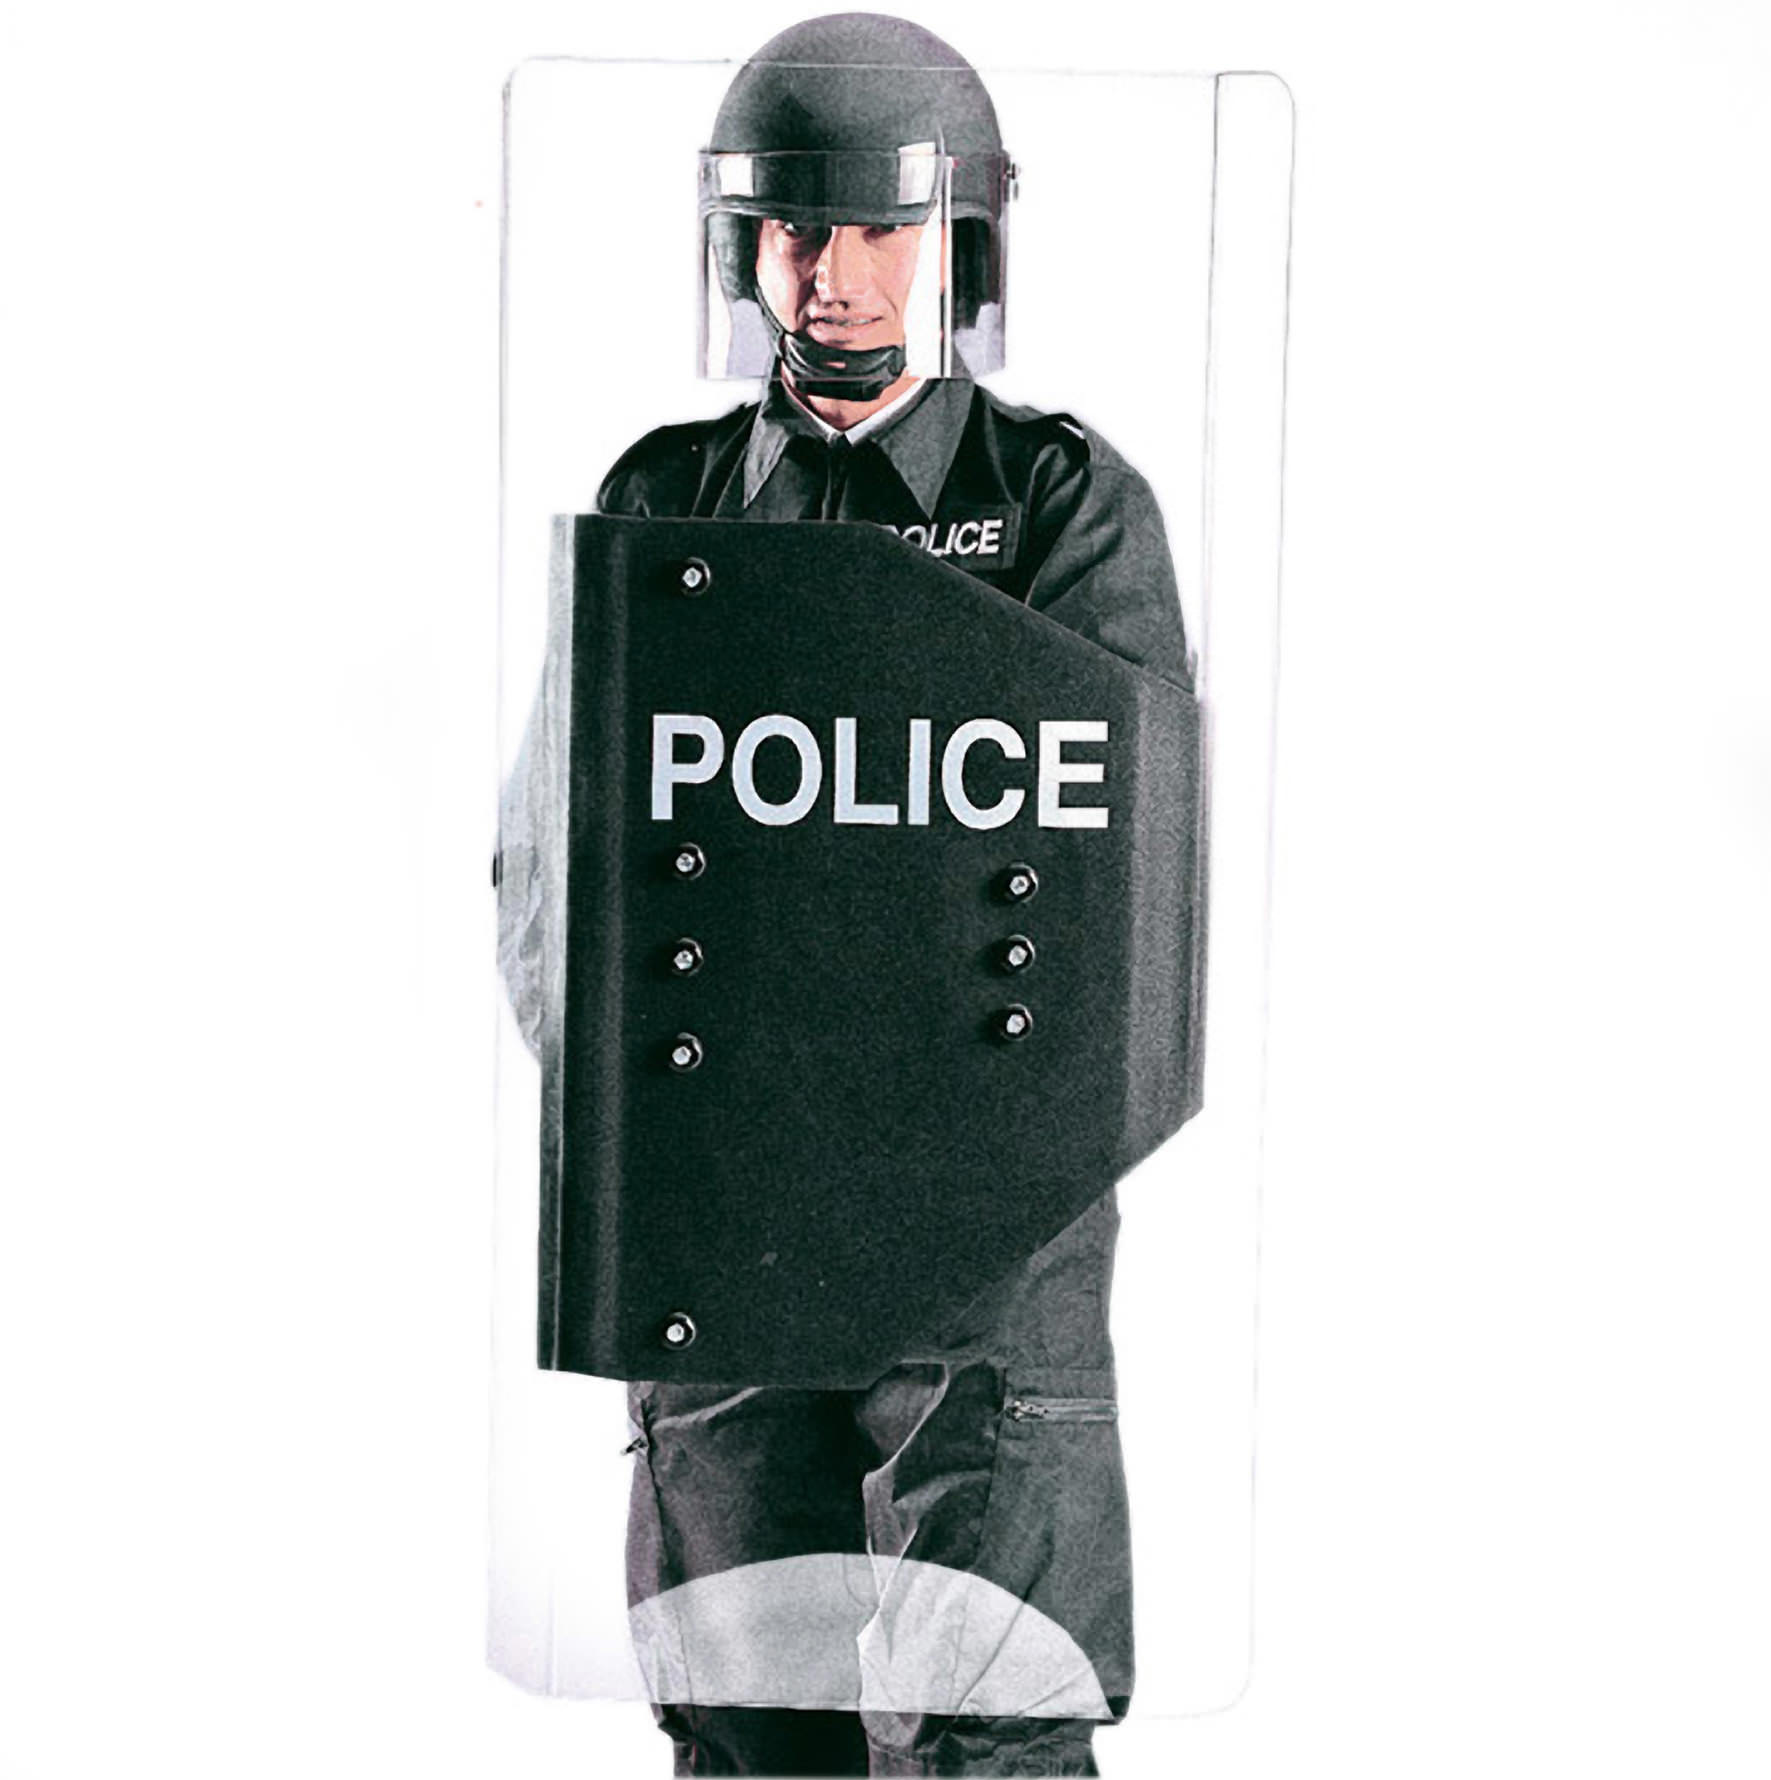 Medium Length Riot Shield - Reinforced Design by MLA for Increased  Protection